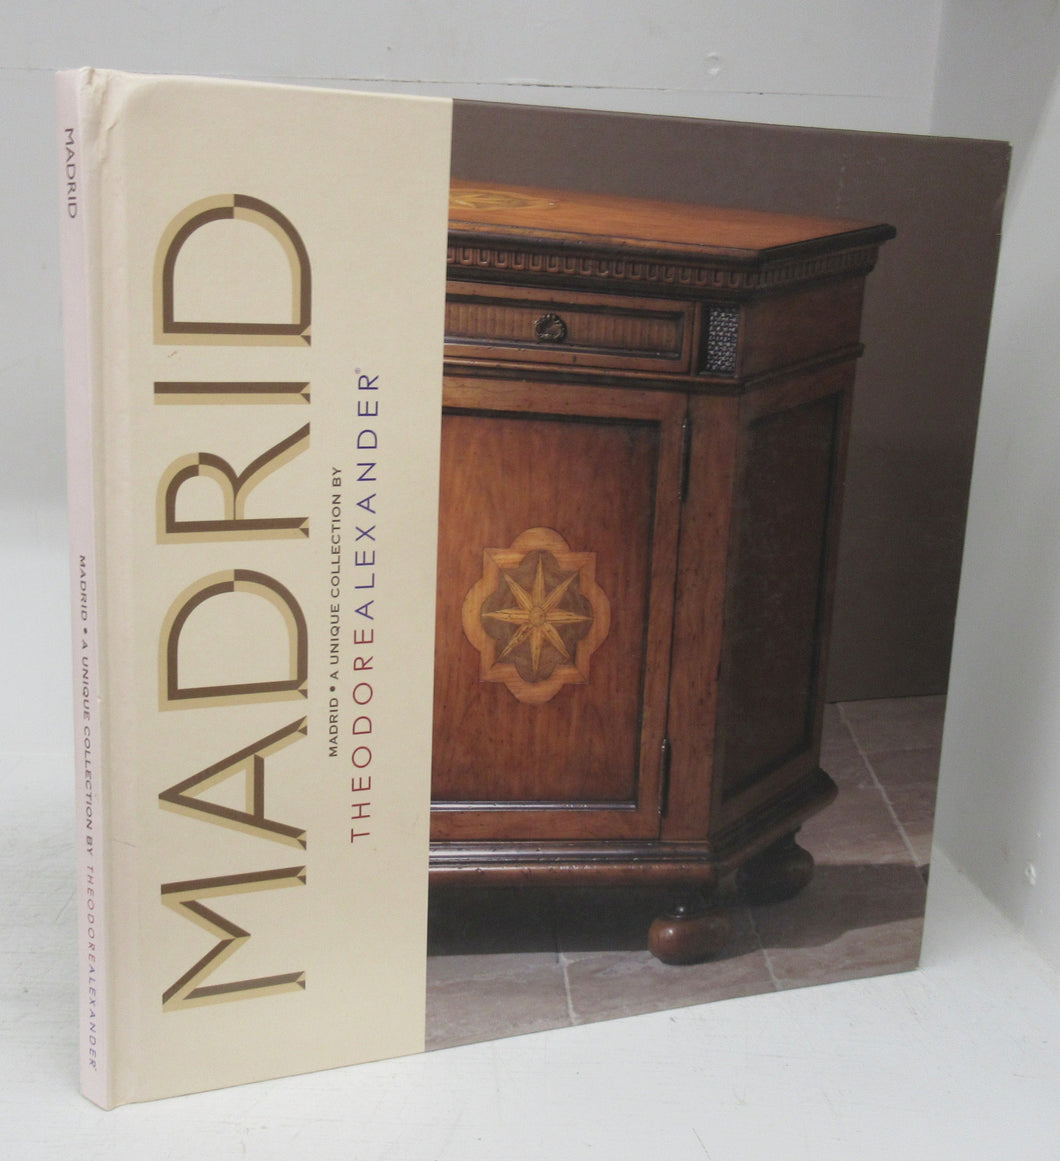 Madrid: A Unique Collection by Theodore Alexander